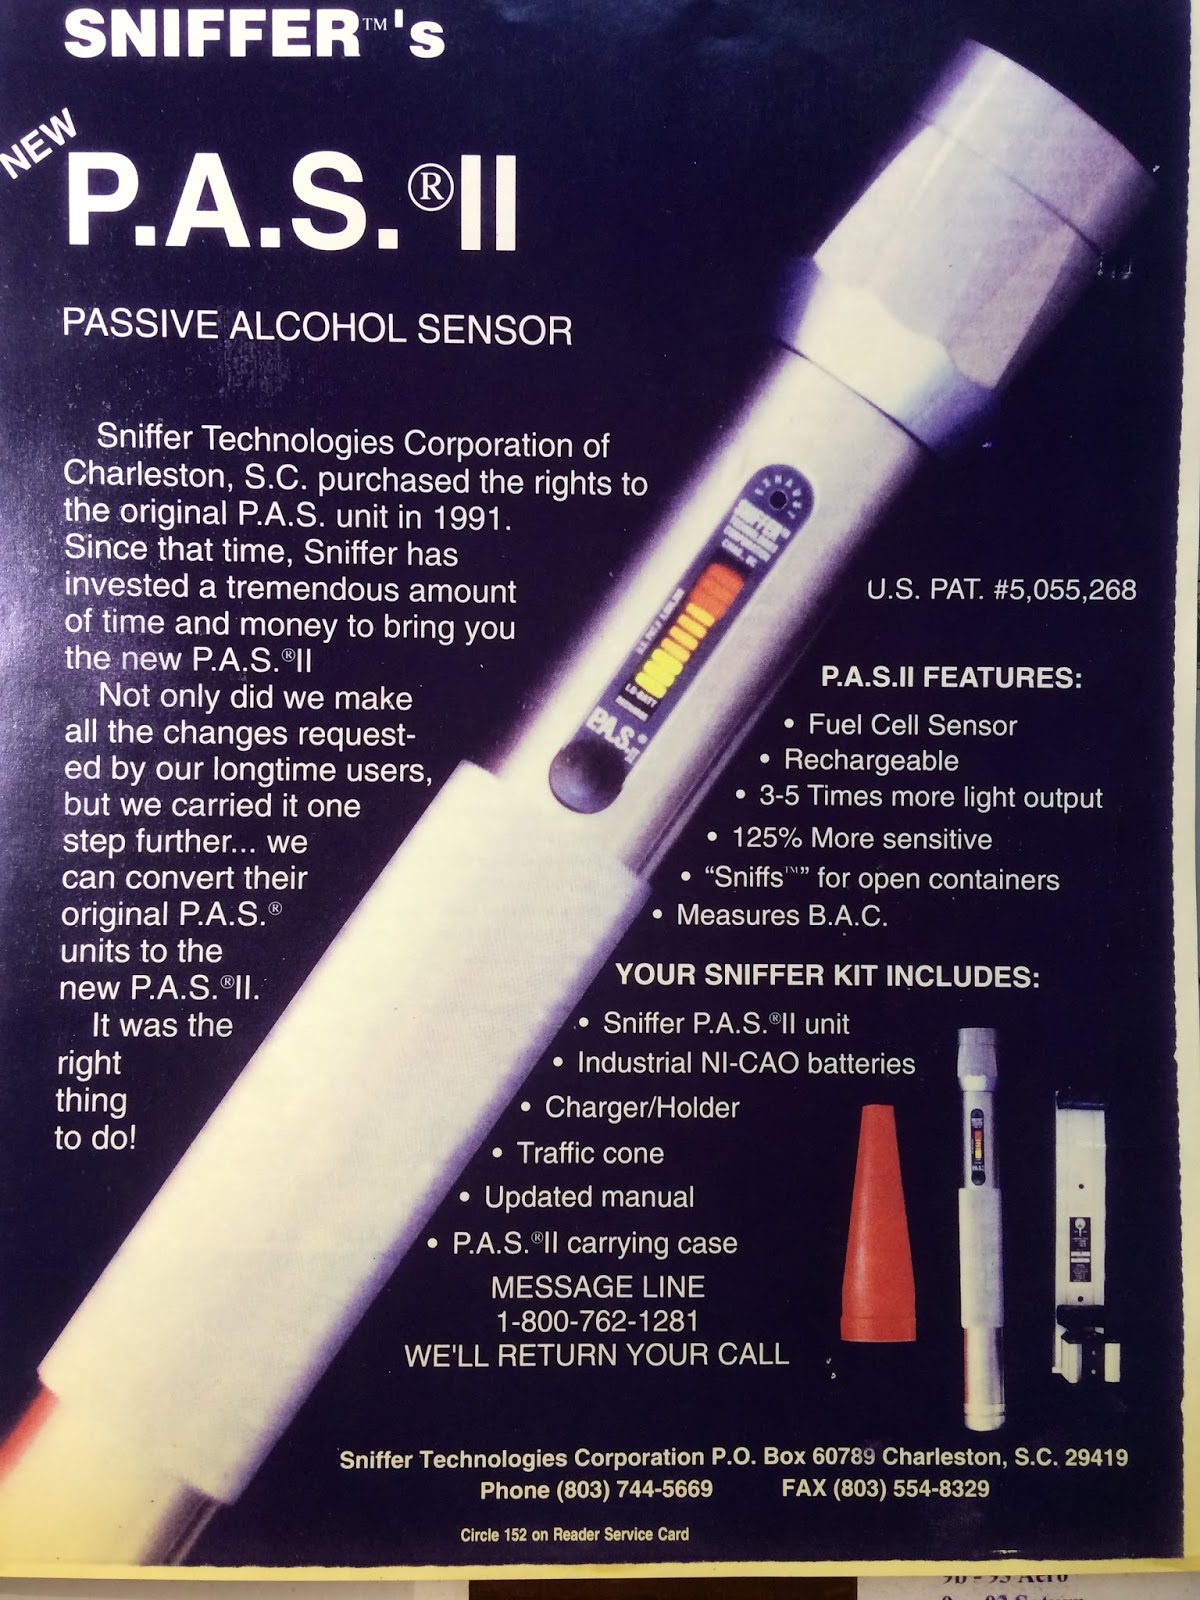 Maglite: More than a Cop light: Advertisements